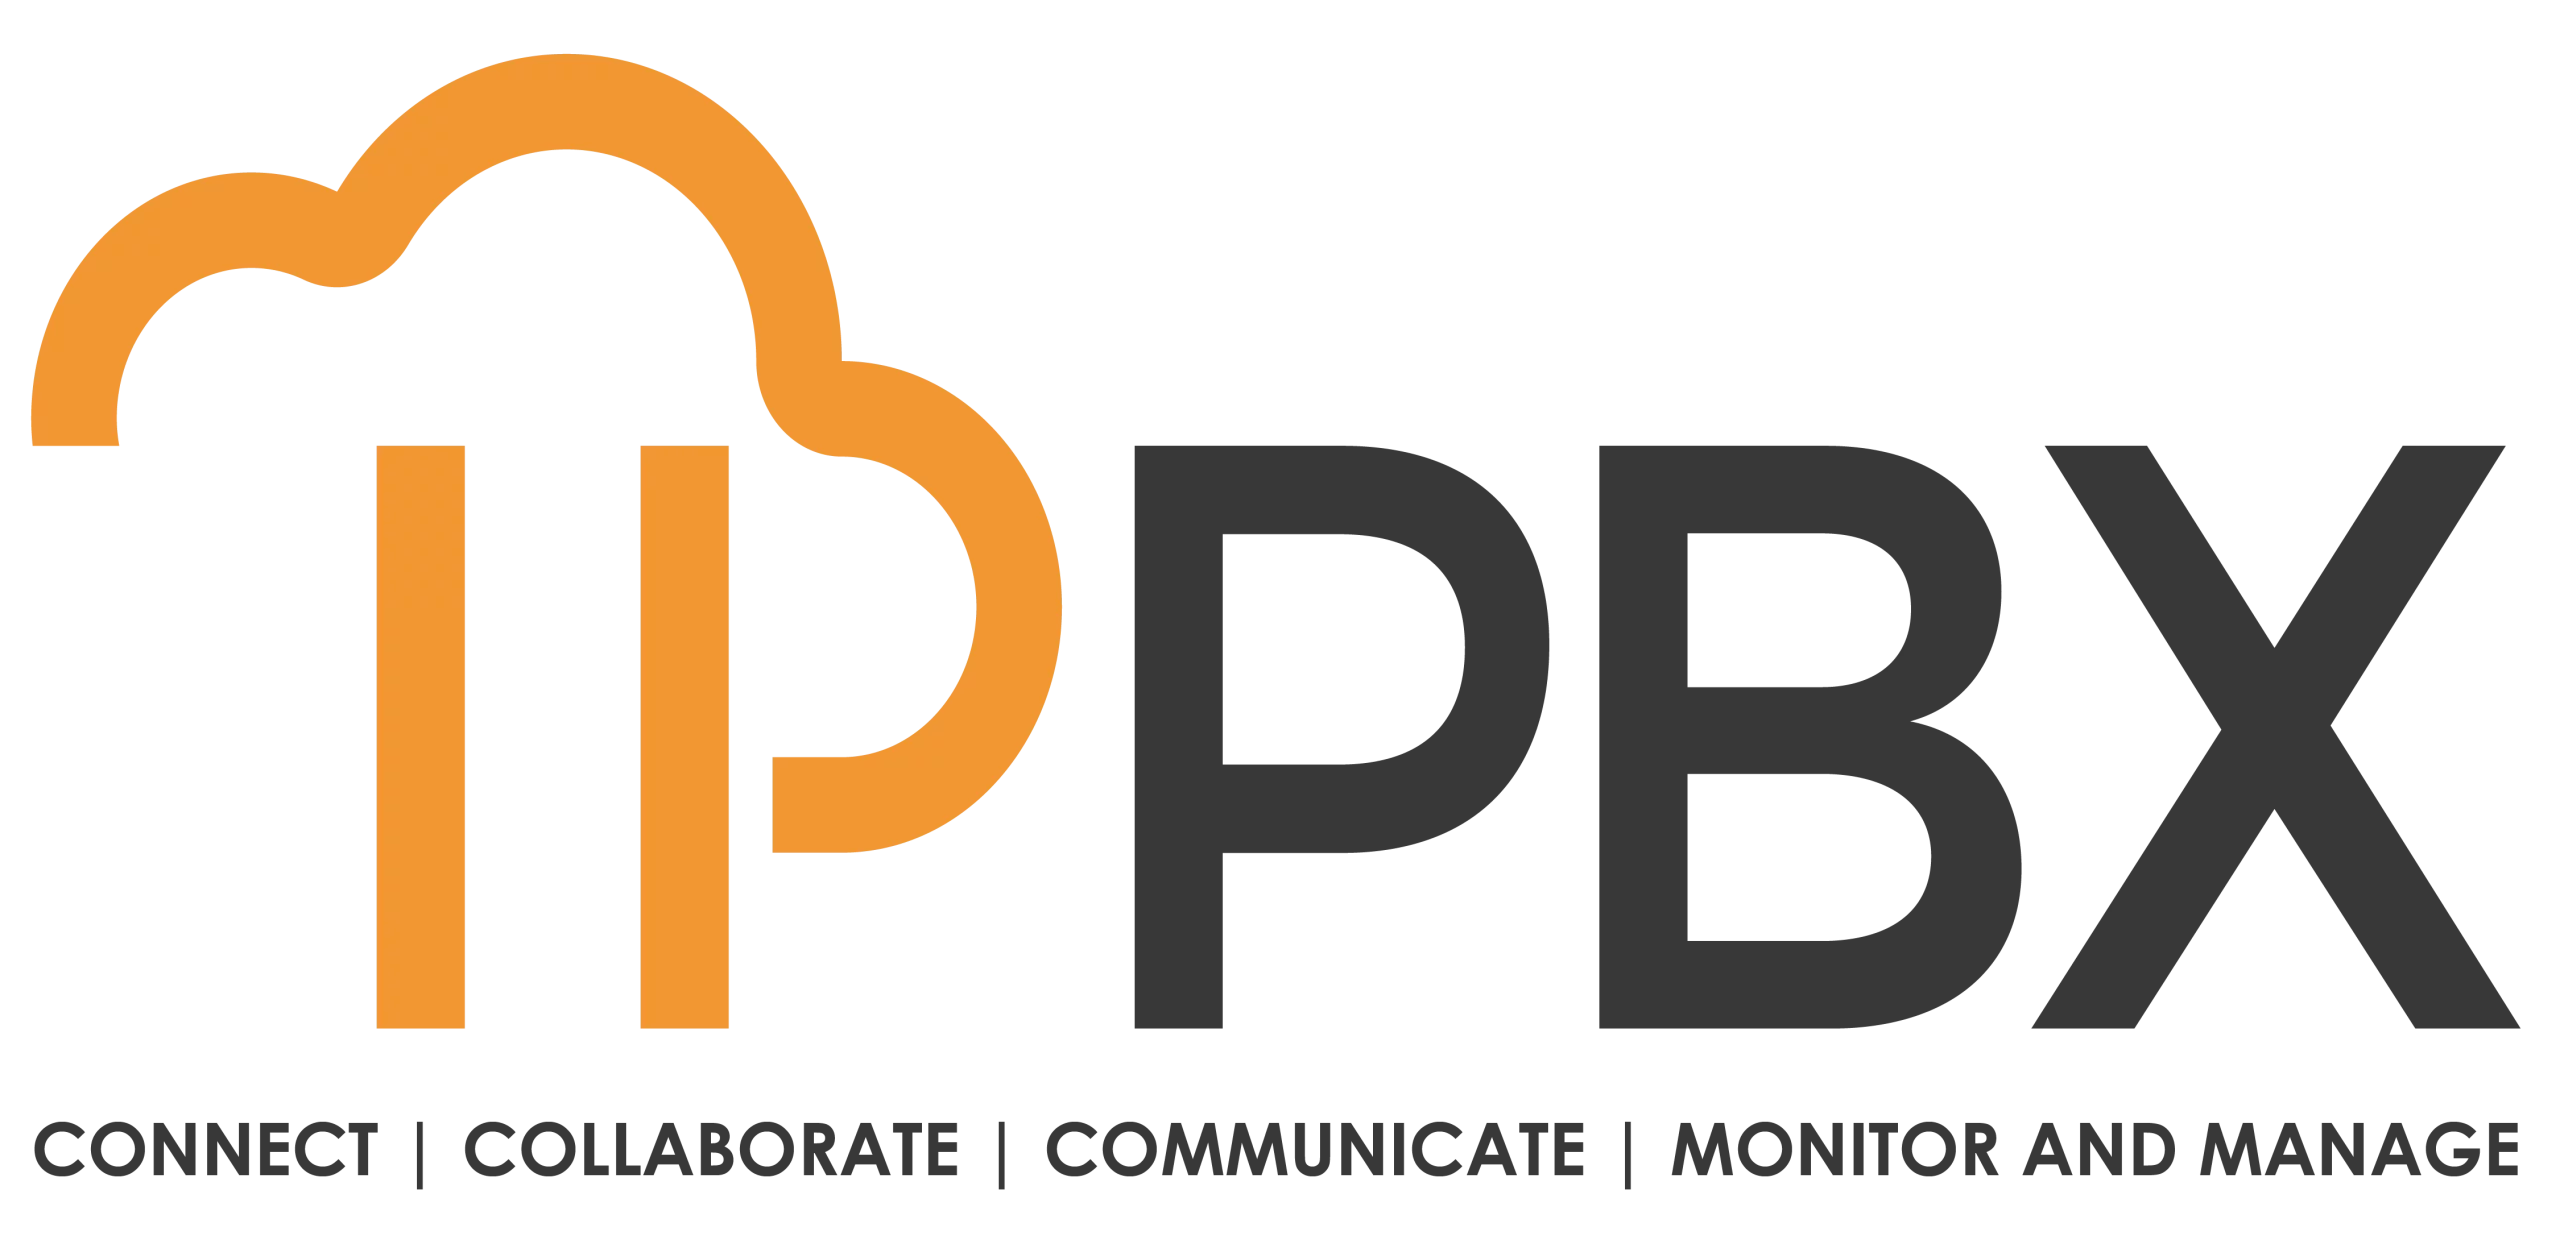 Blog IPPBX: Connect Collaborate Communicate Monitor & Manage